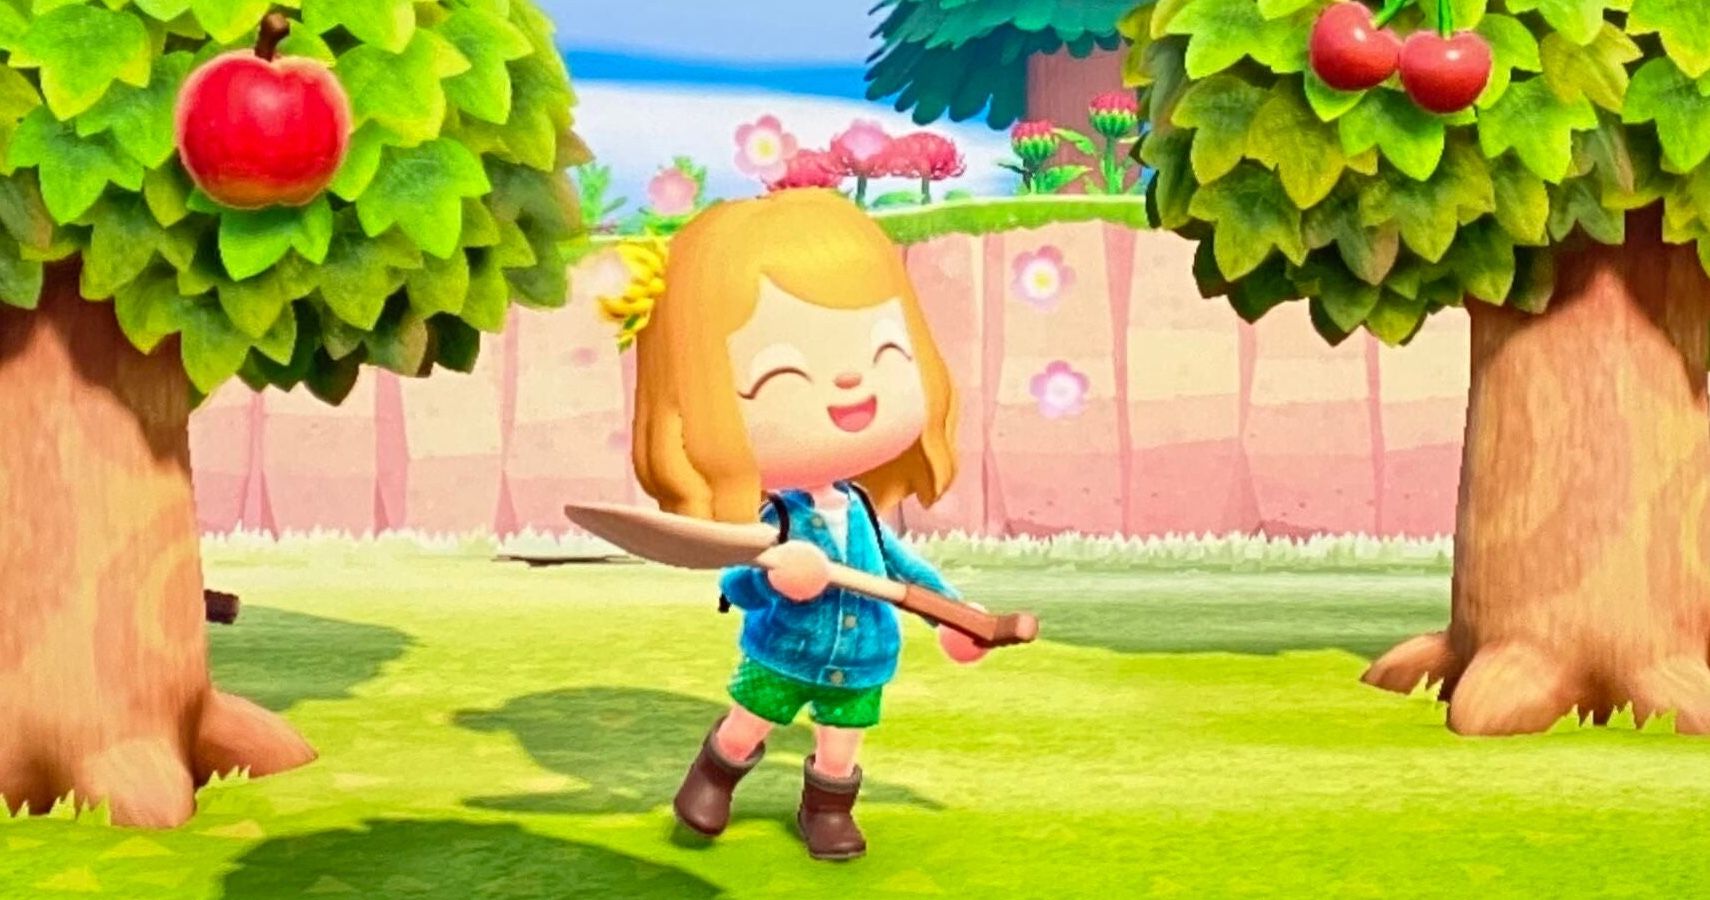 The main character of Animal Crossing: New Horizons standing in between trees.